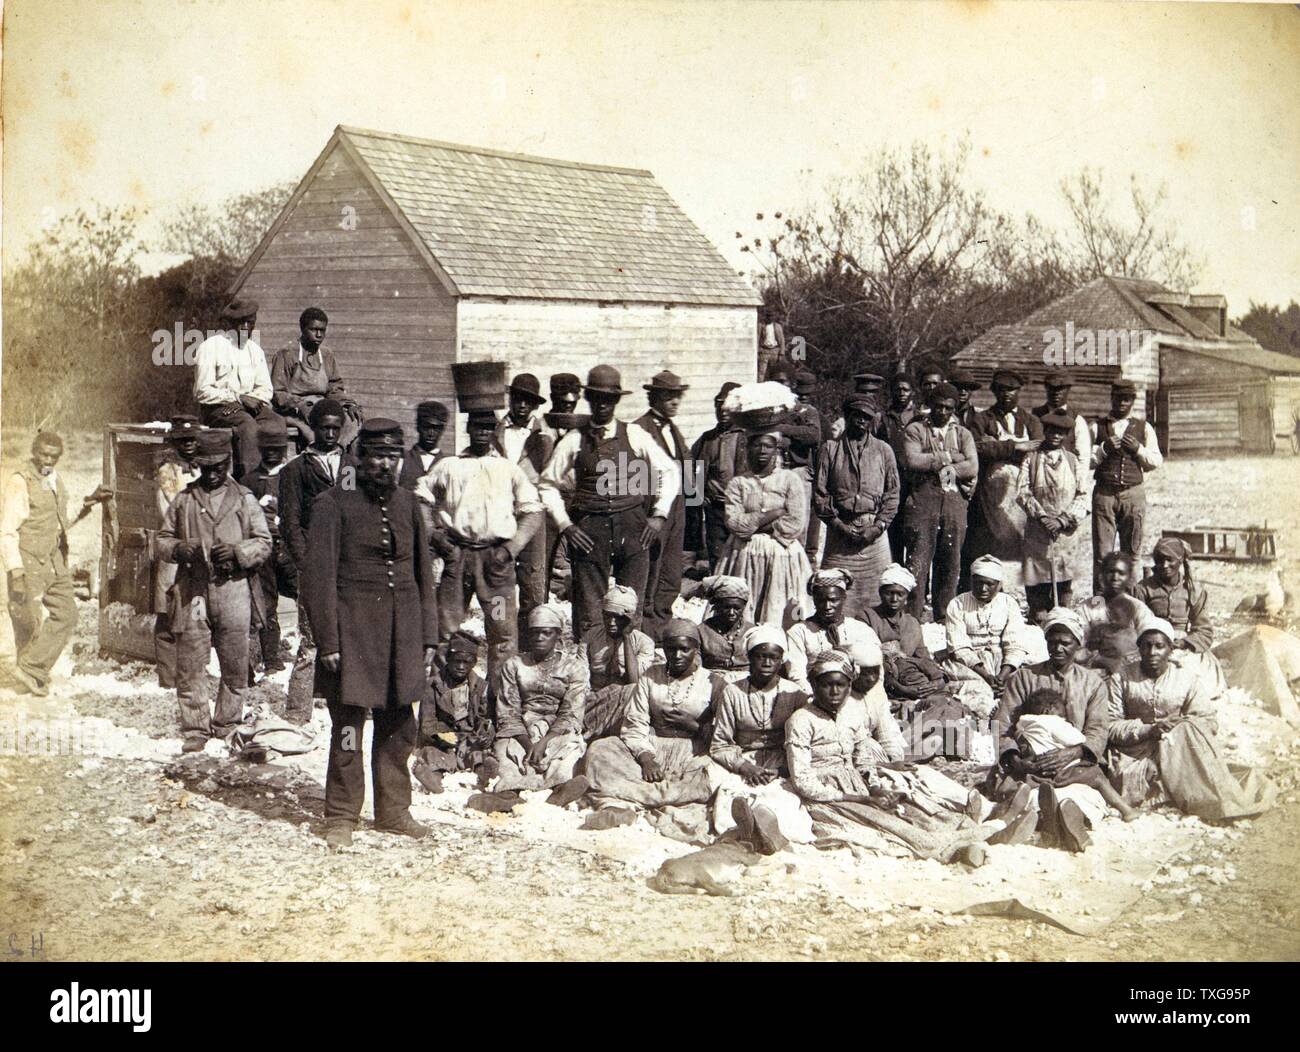 Slaves of Thomas F Drayton of Magnolia Plantation, Hilton Head, South Carolina. During the American Civil War (1861-1865), Drayton, a Southern plantation owner, served as a Brigadier General in the Confederate Army Stock Photo